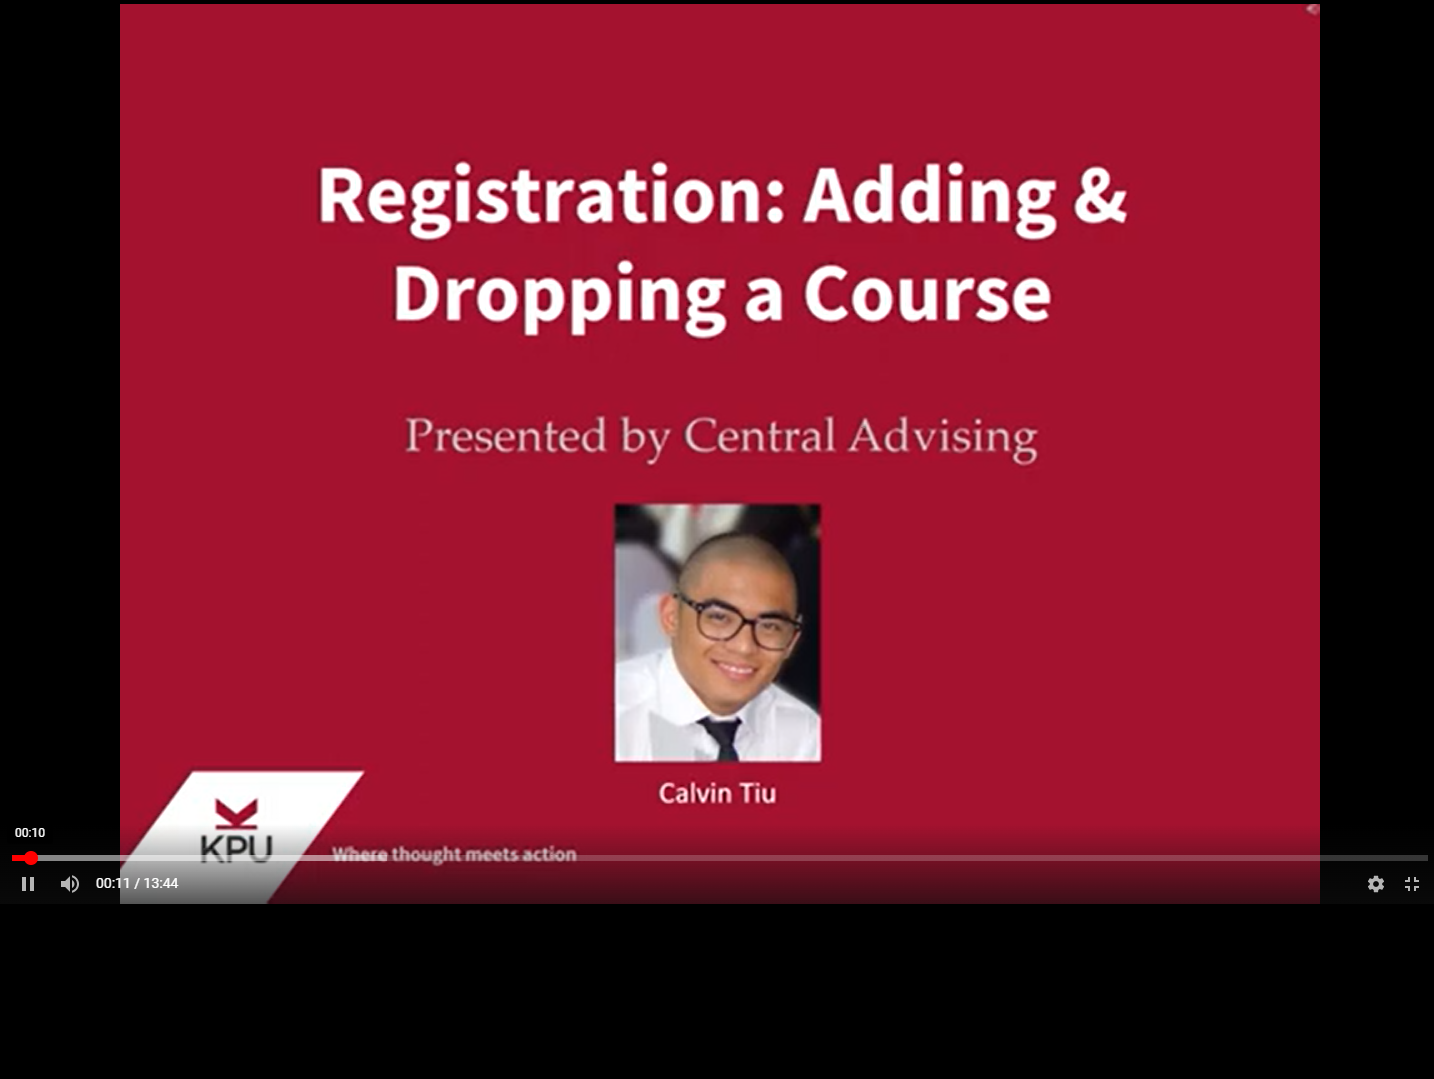 how to register - central advising